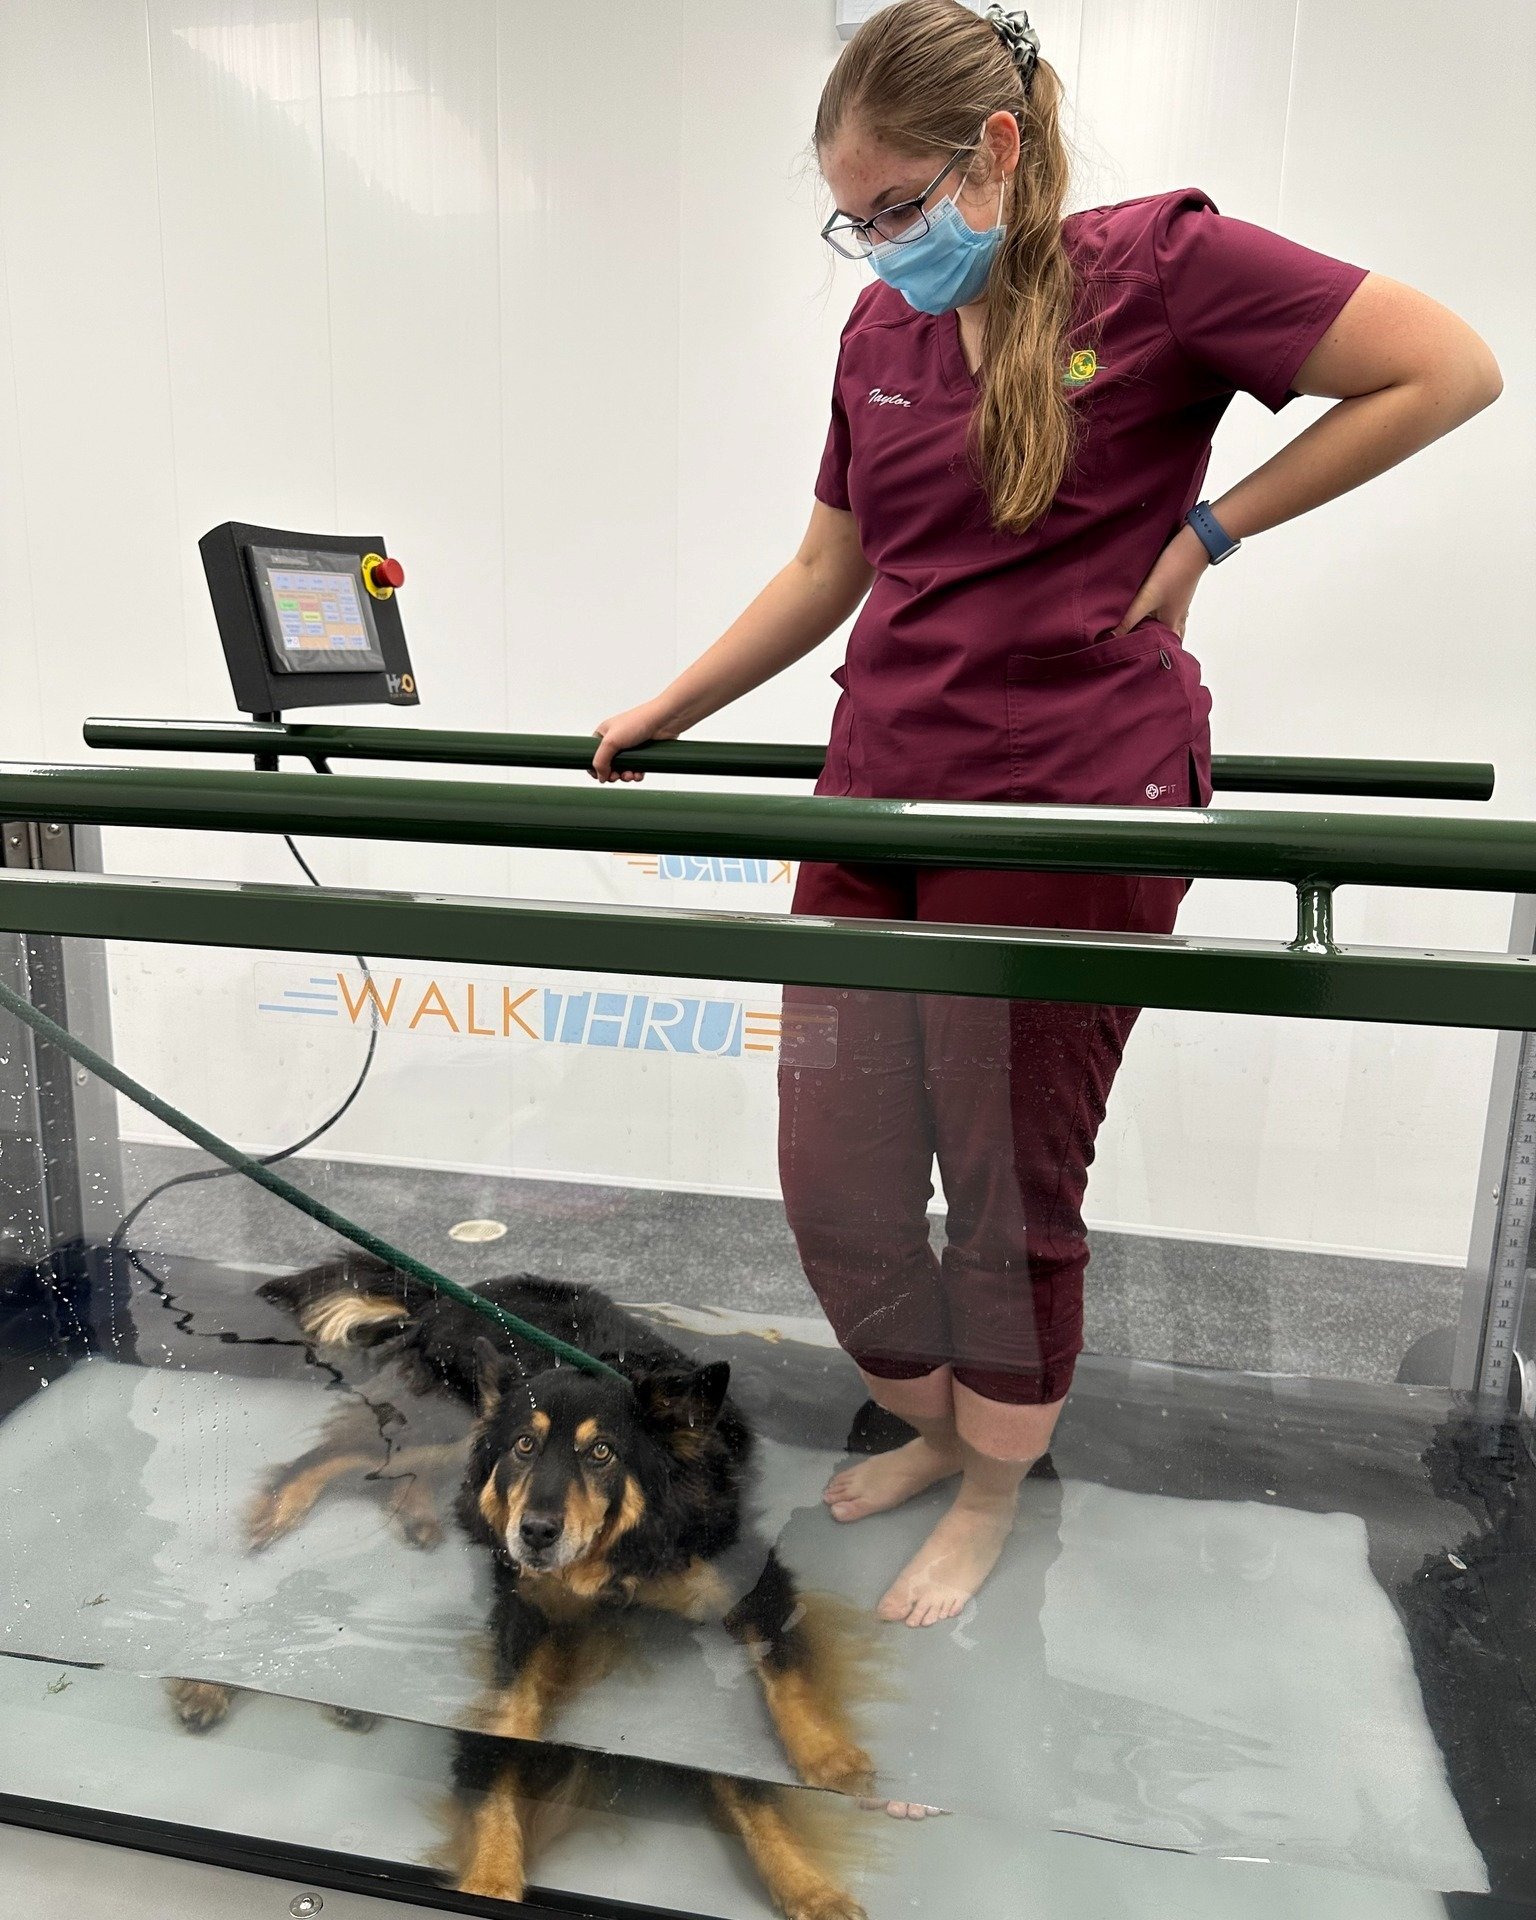 The day has come! Our water treadmill is up and running and so is @cosplaygus! 
With the guidance of our integrative medicine team, the water treadmill is a fantastic tool which can be used to build muscle post-operatively, for arthritic patients and